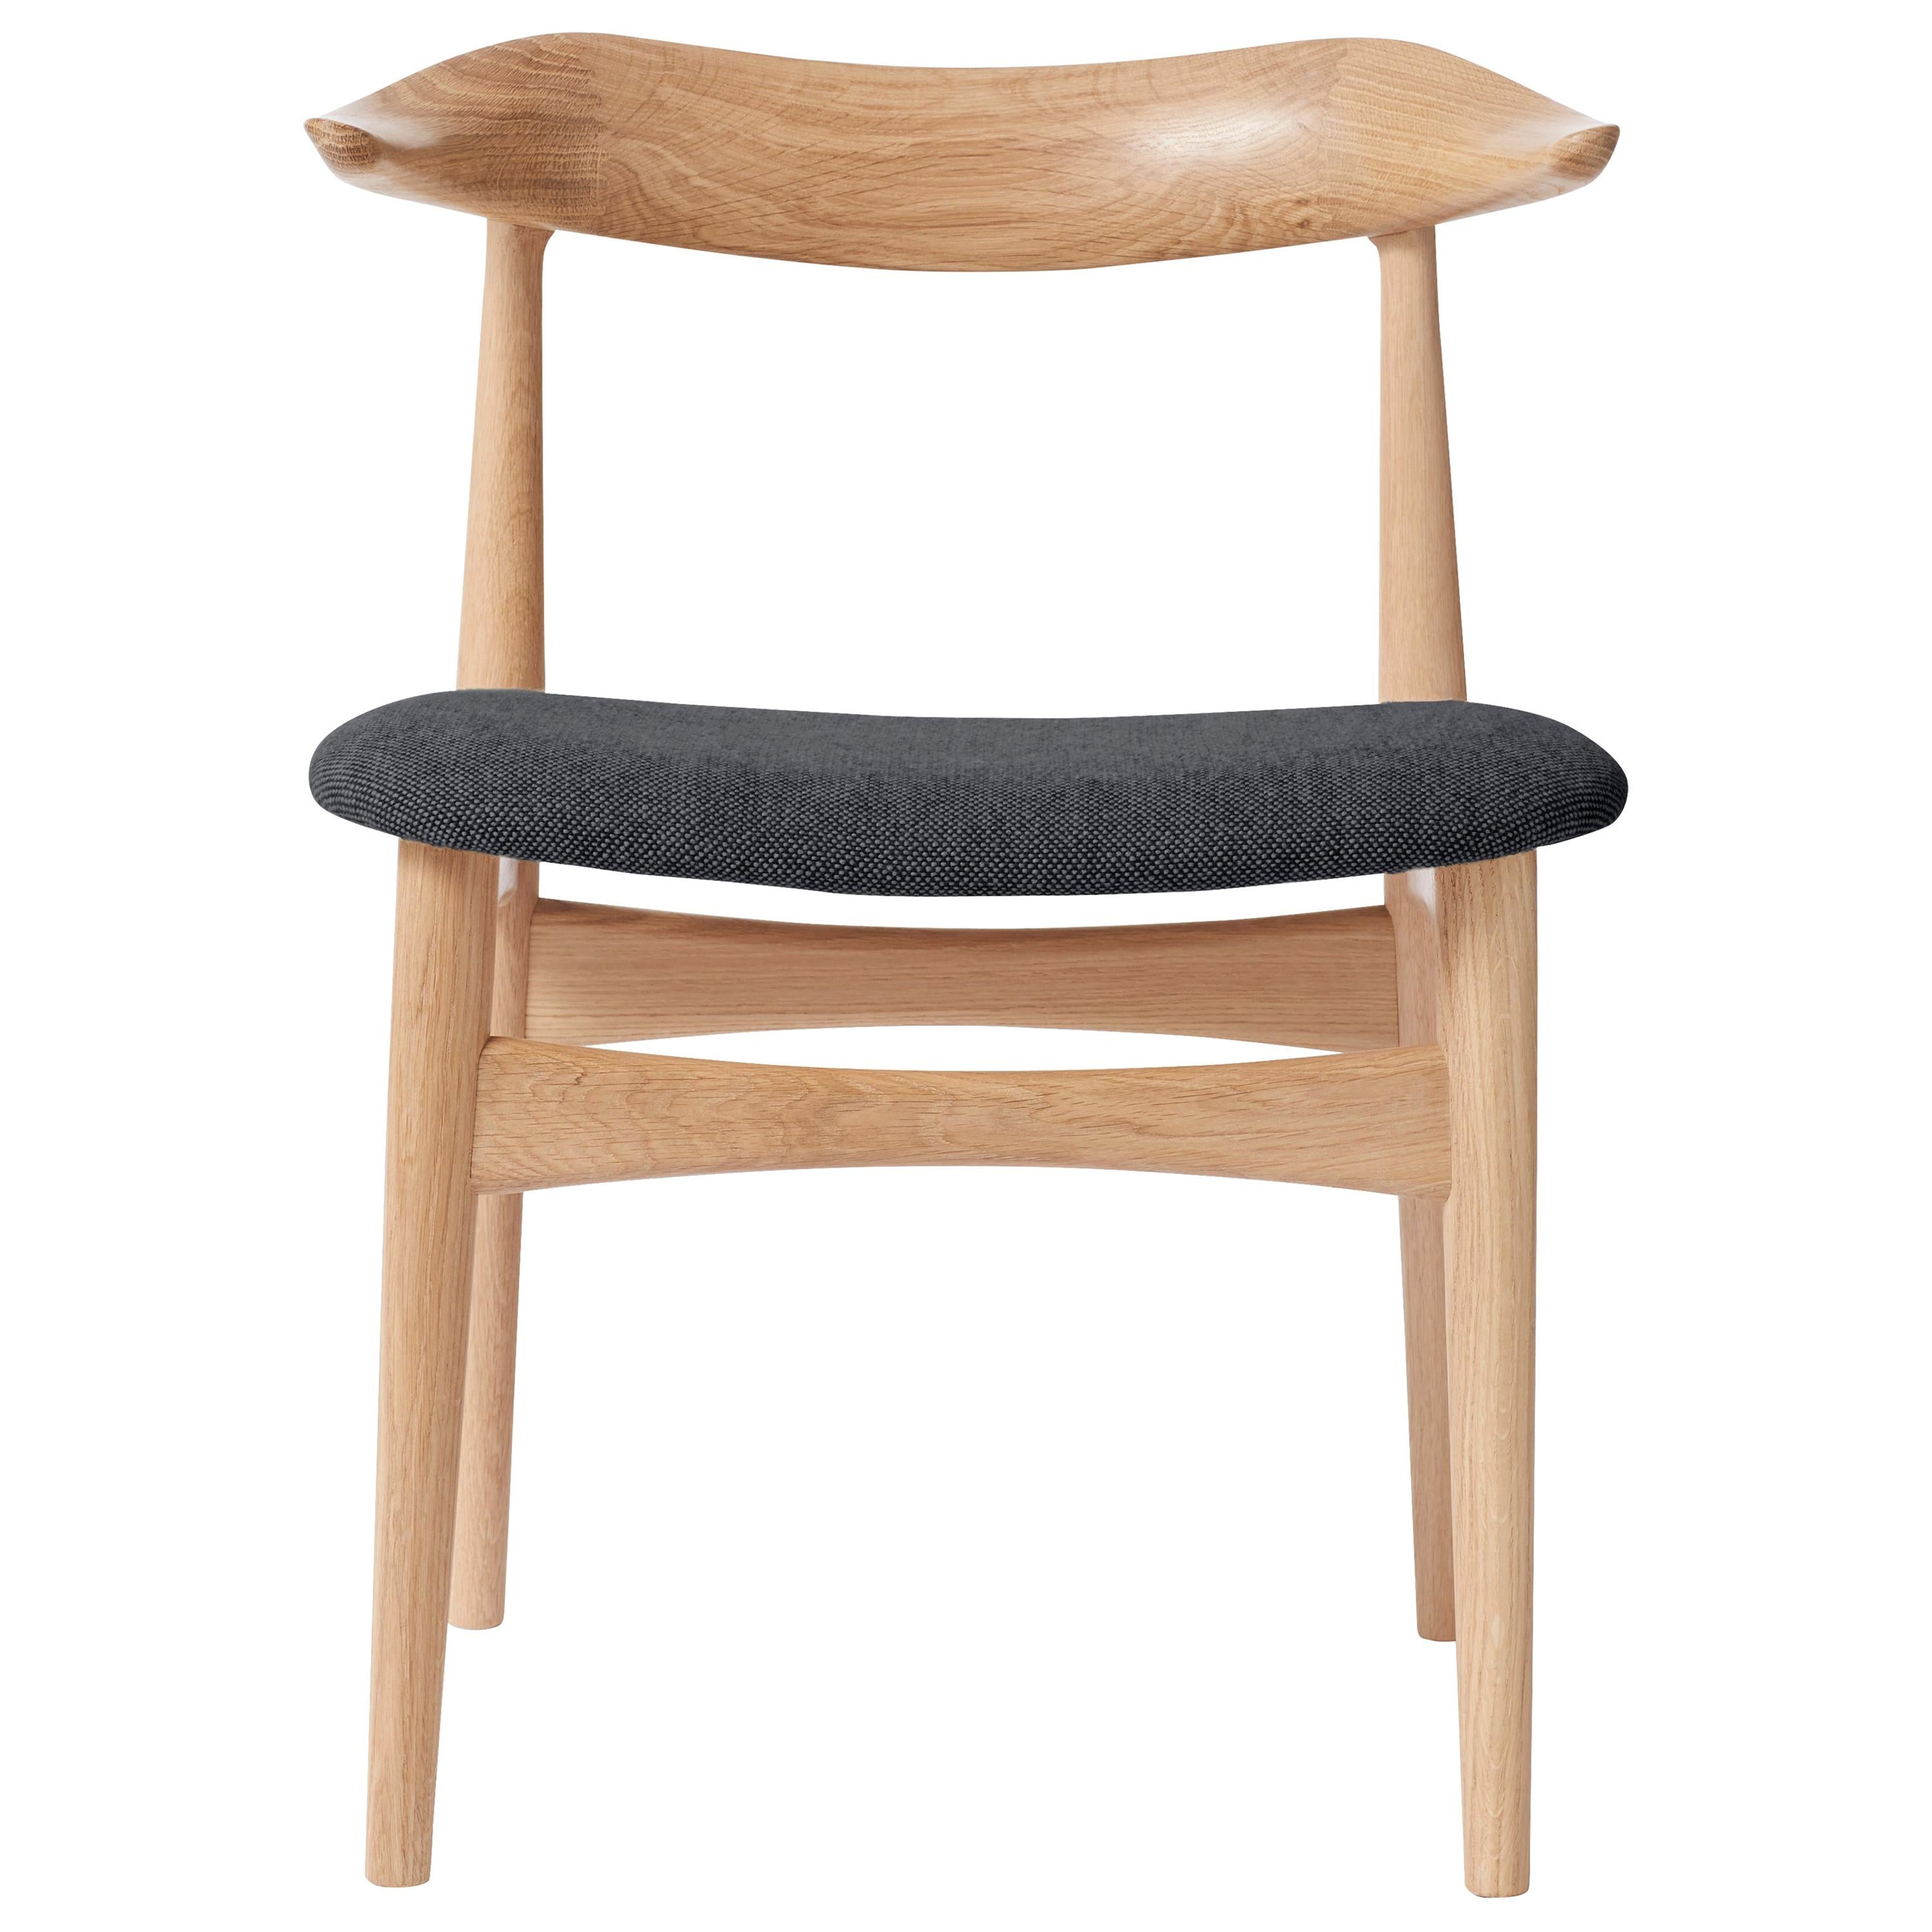 Cow Horn Oak Chair, by Knud Færch from Warm Nordic